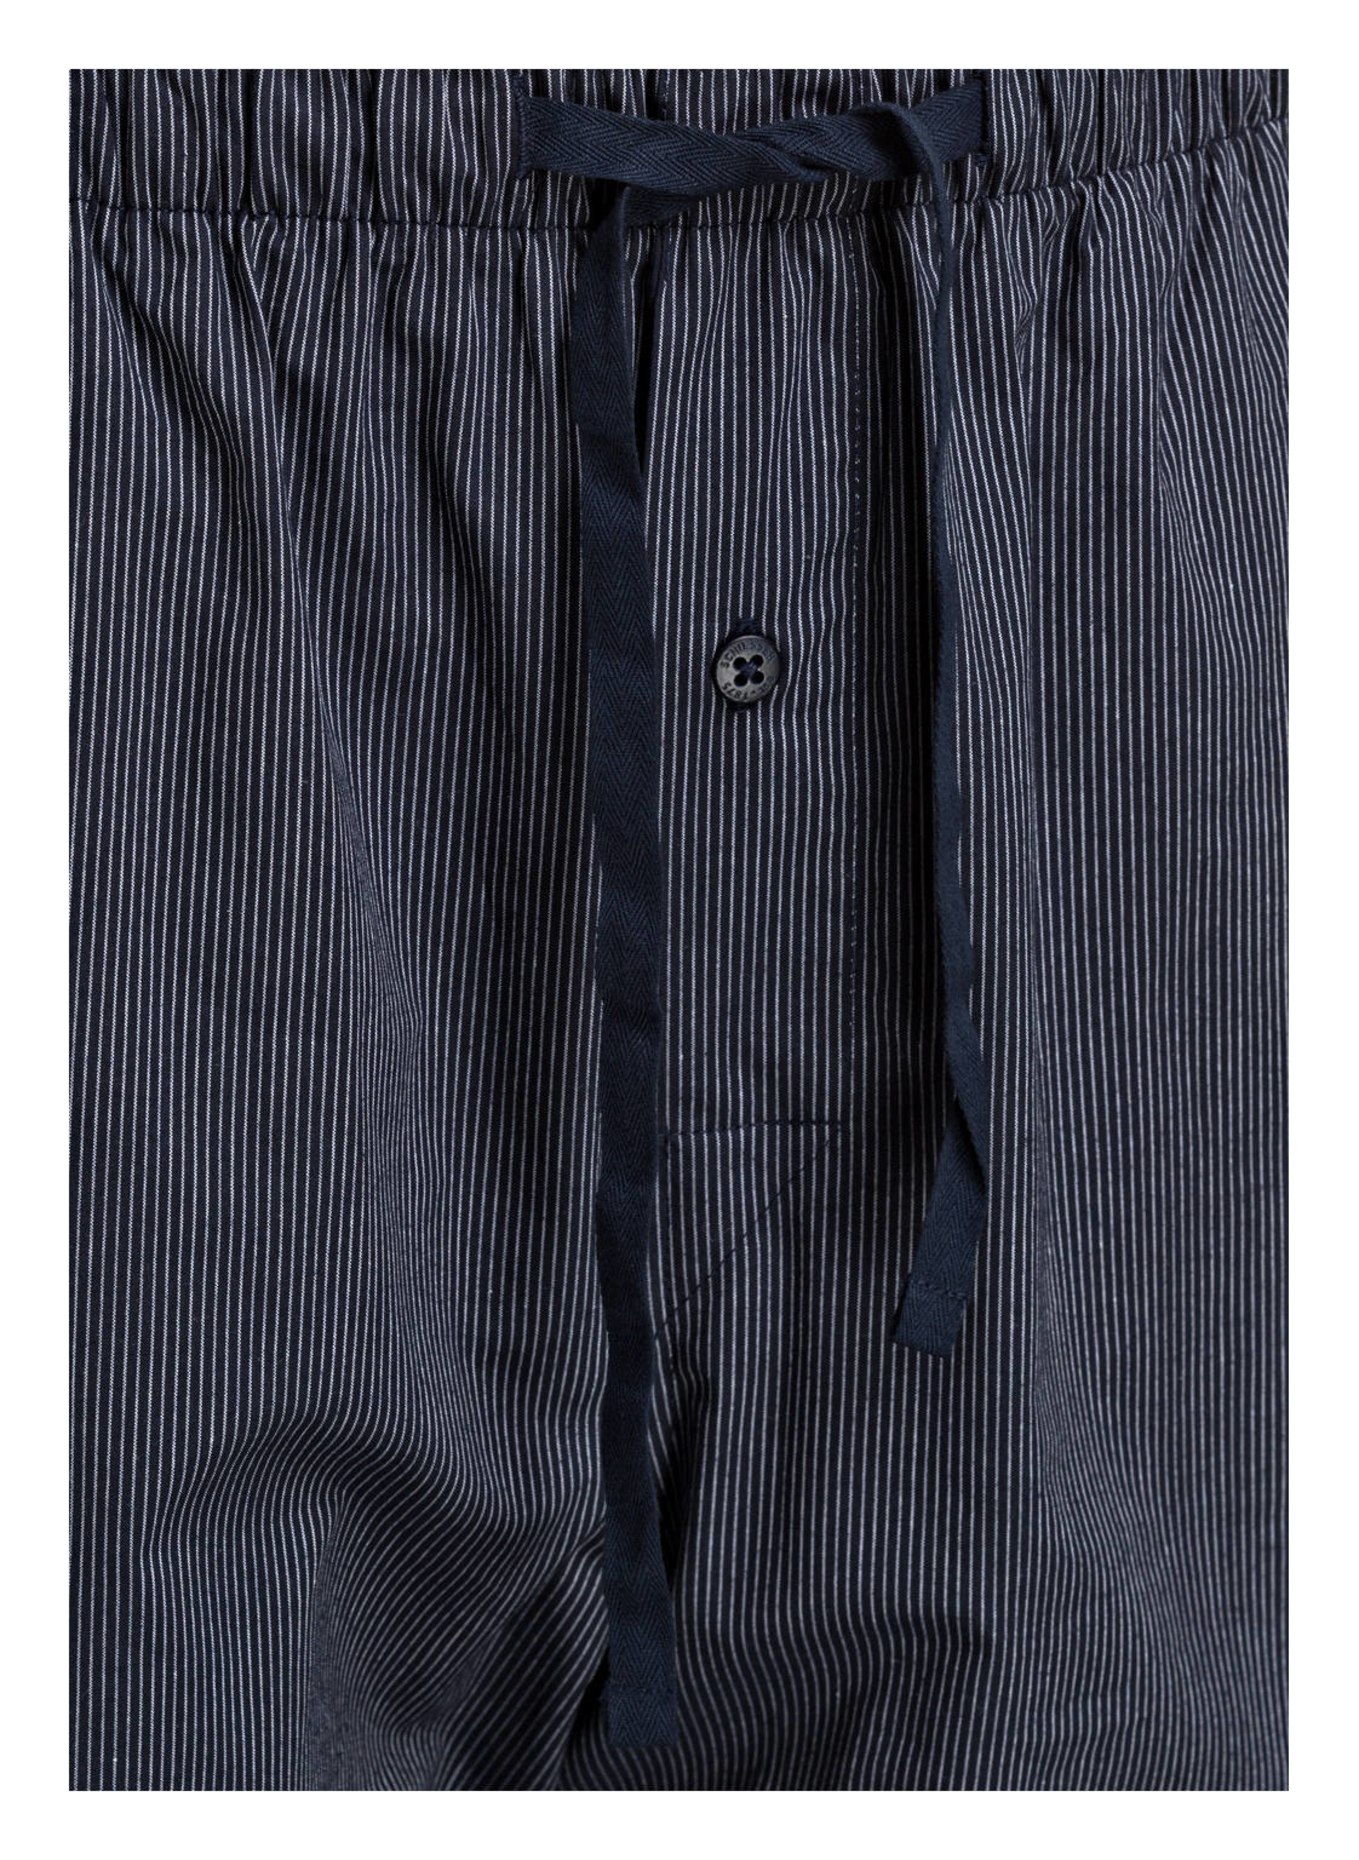 SCHIESSER Pajama pants MIX+RELAX , Color: DARK BLUE/ WHITE STRIPED (Image 3)